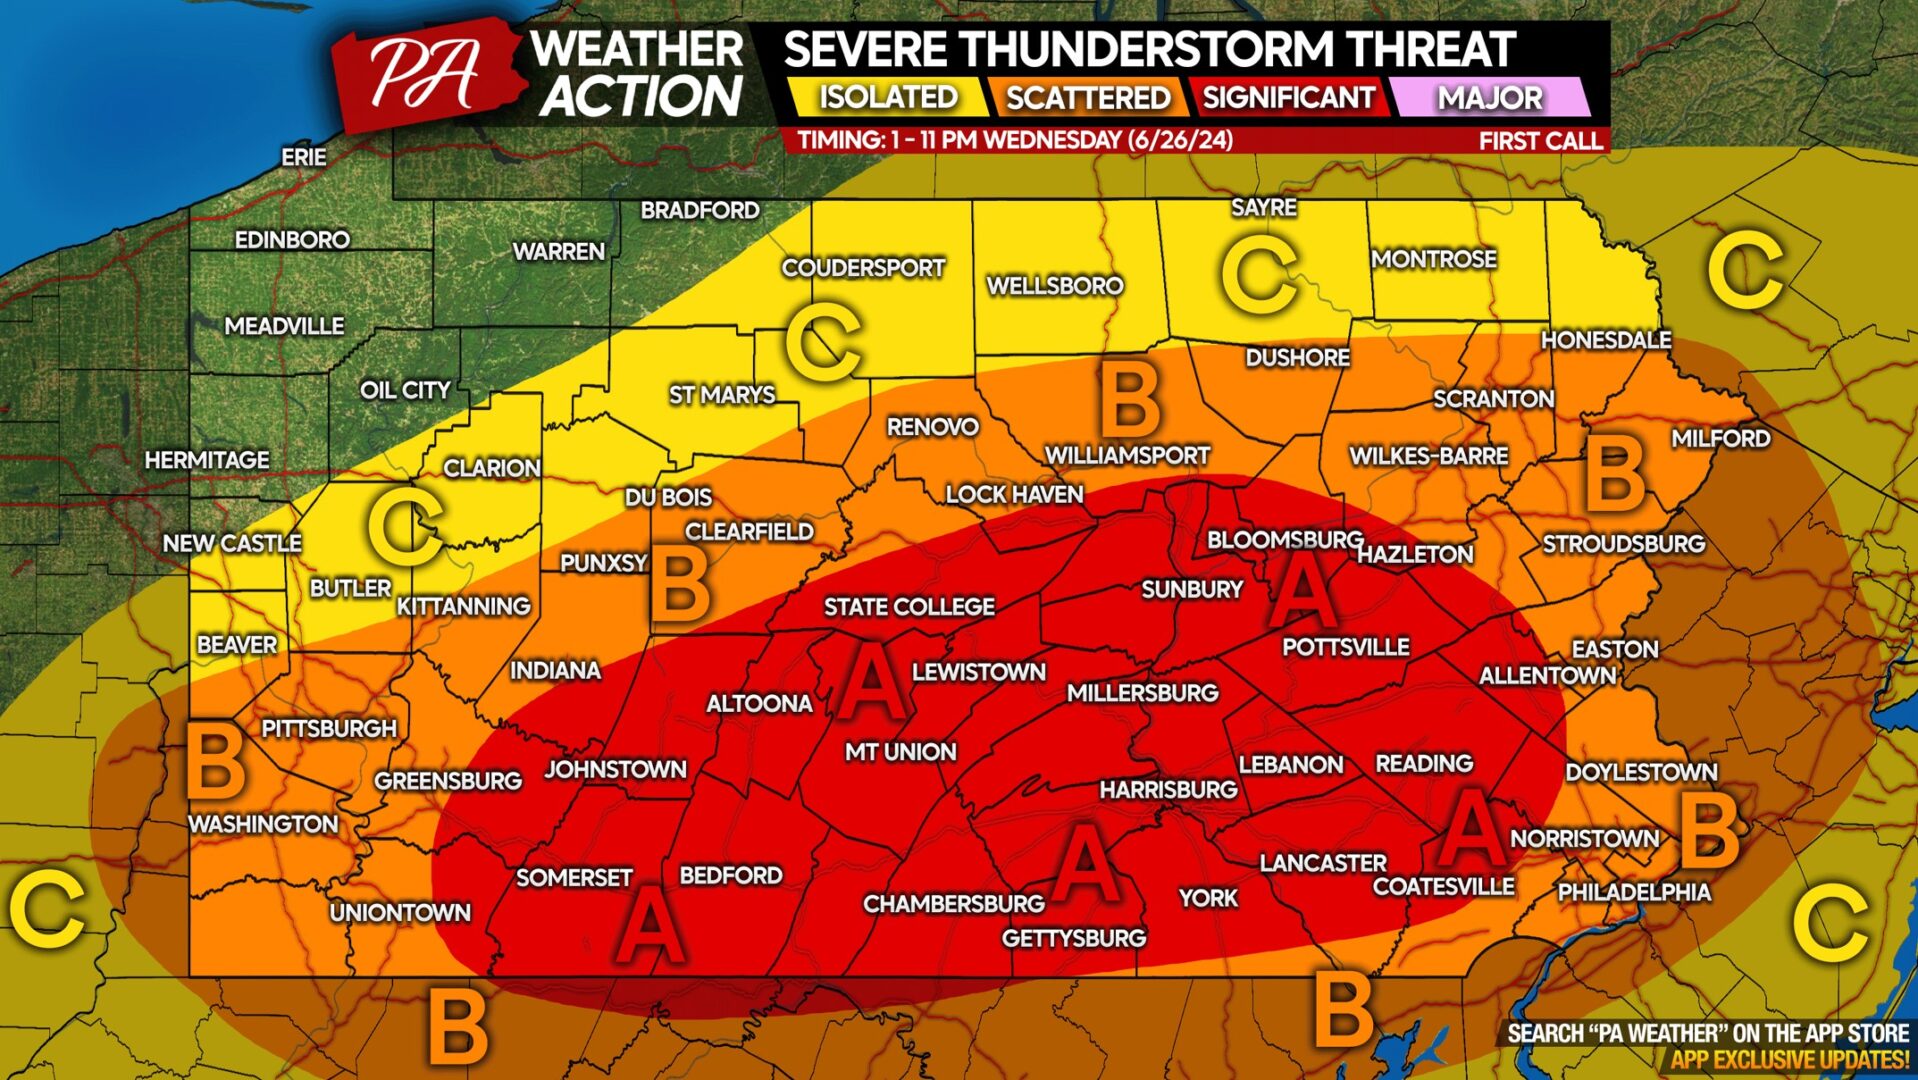 Significant Severe Thunderstorm Potential on Wednesday; Damaging Winds, Hail, & Isolated Tornadoes Possible